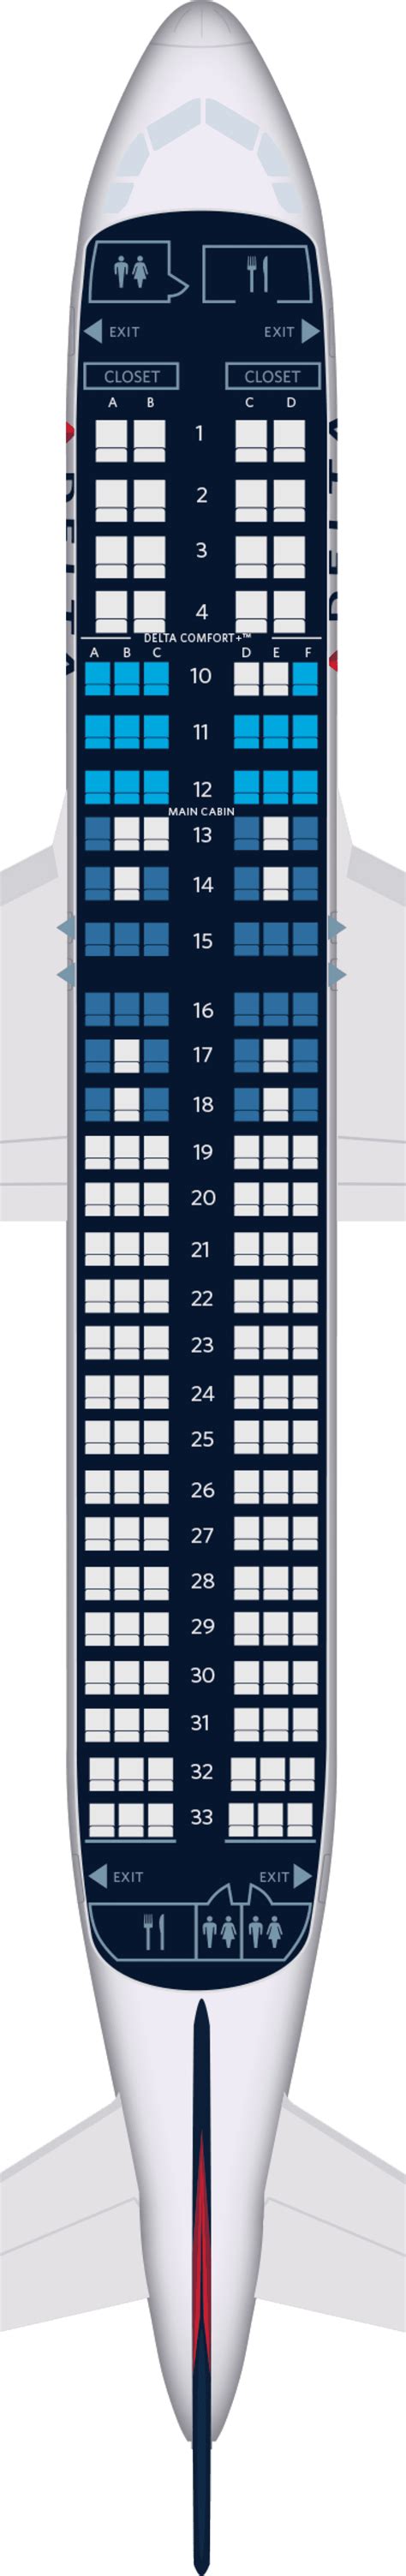 Airbus A320neo Seat Map Image To U